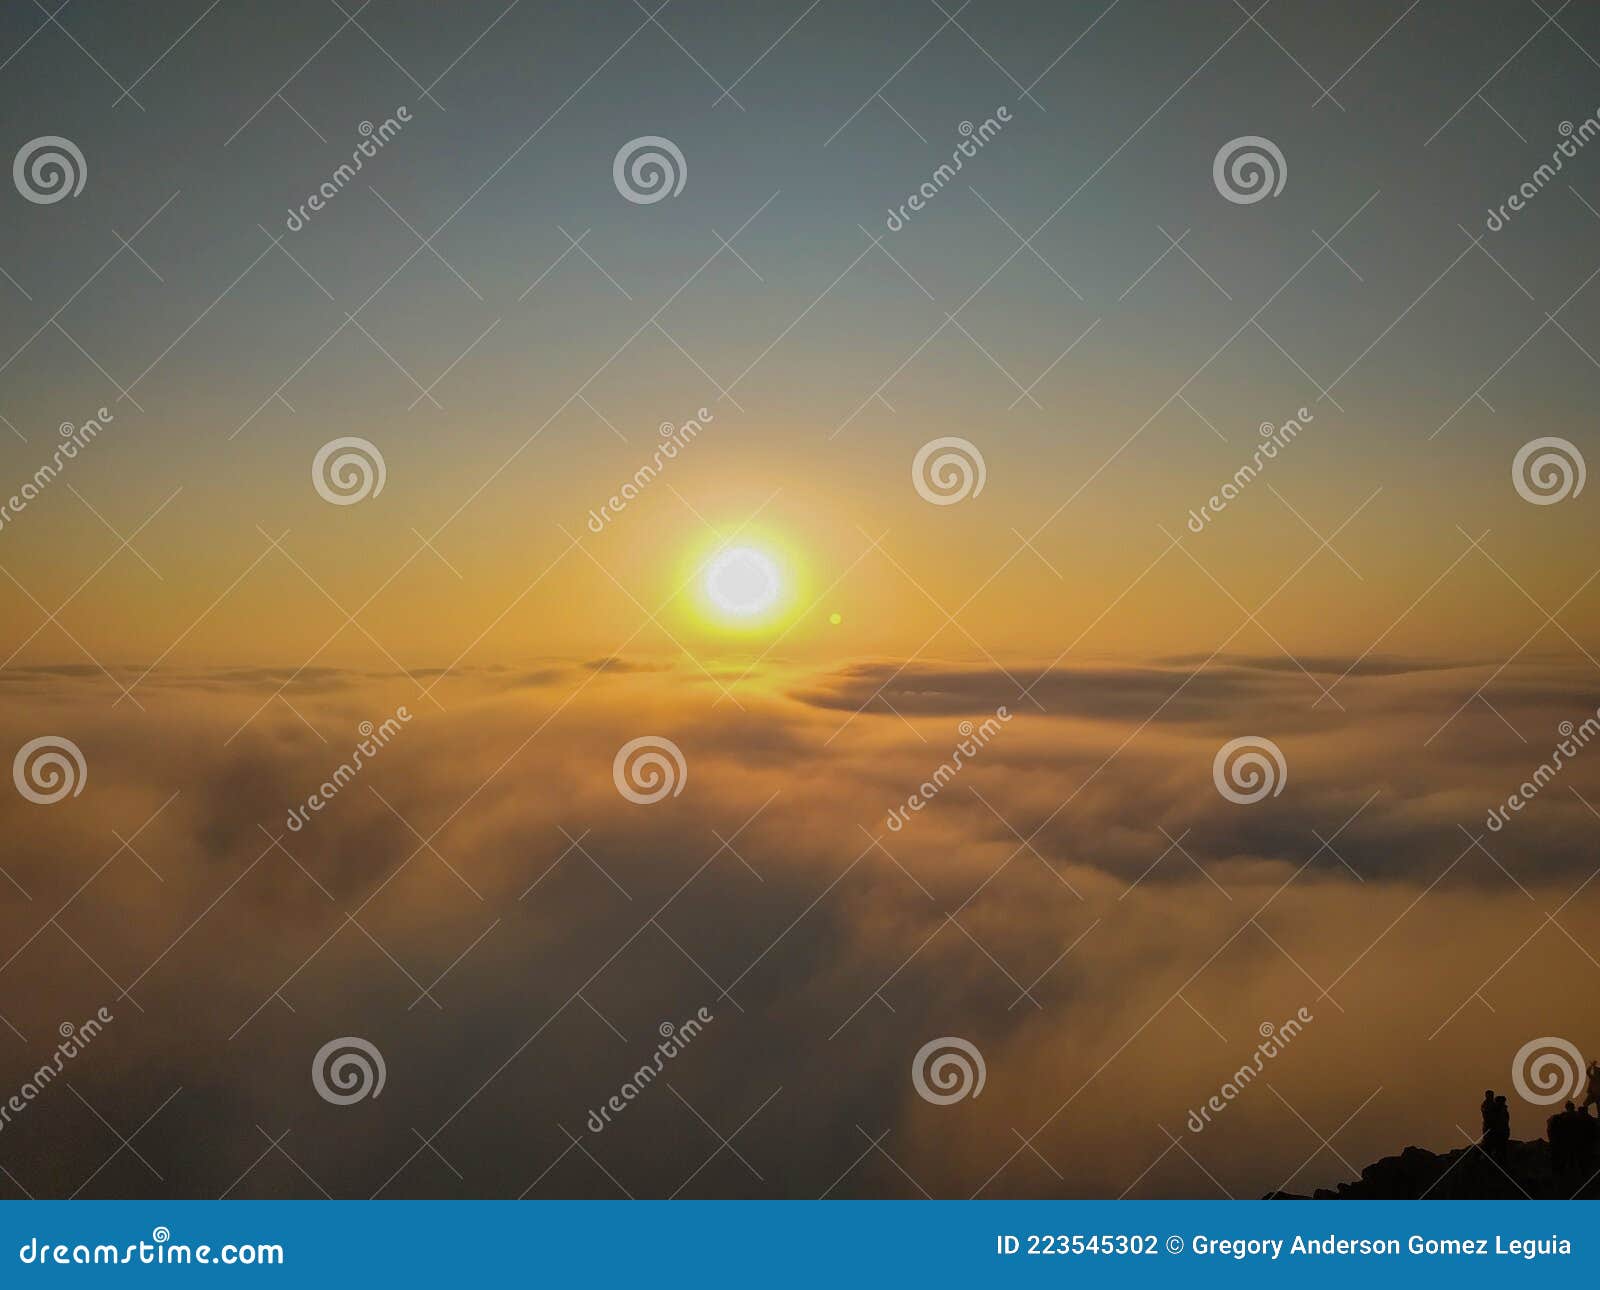 the sun shining above the clouds on a cliff